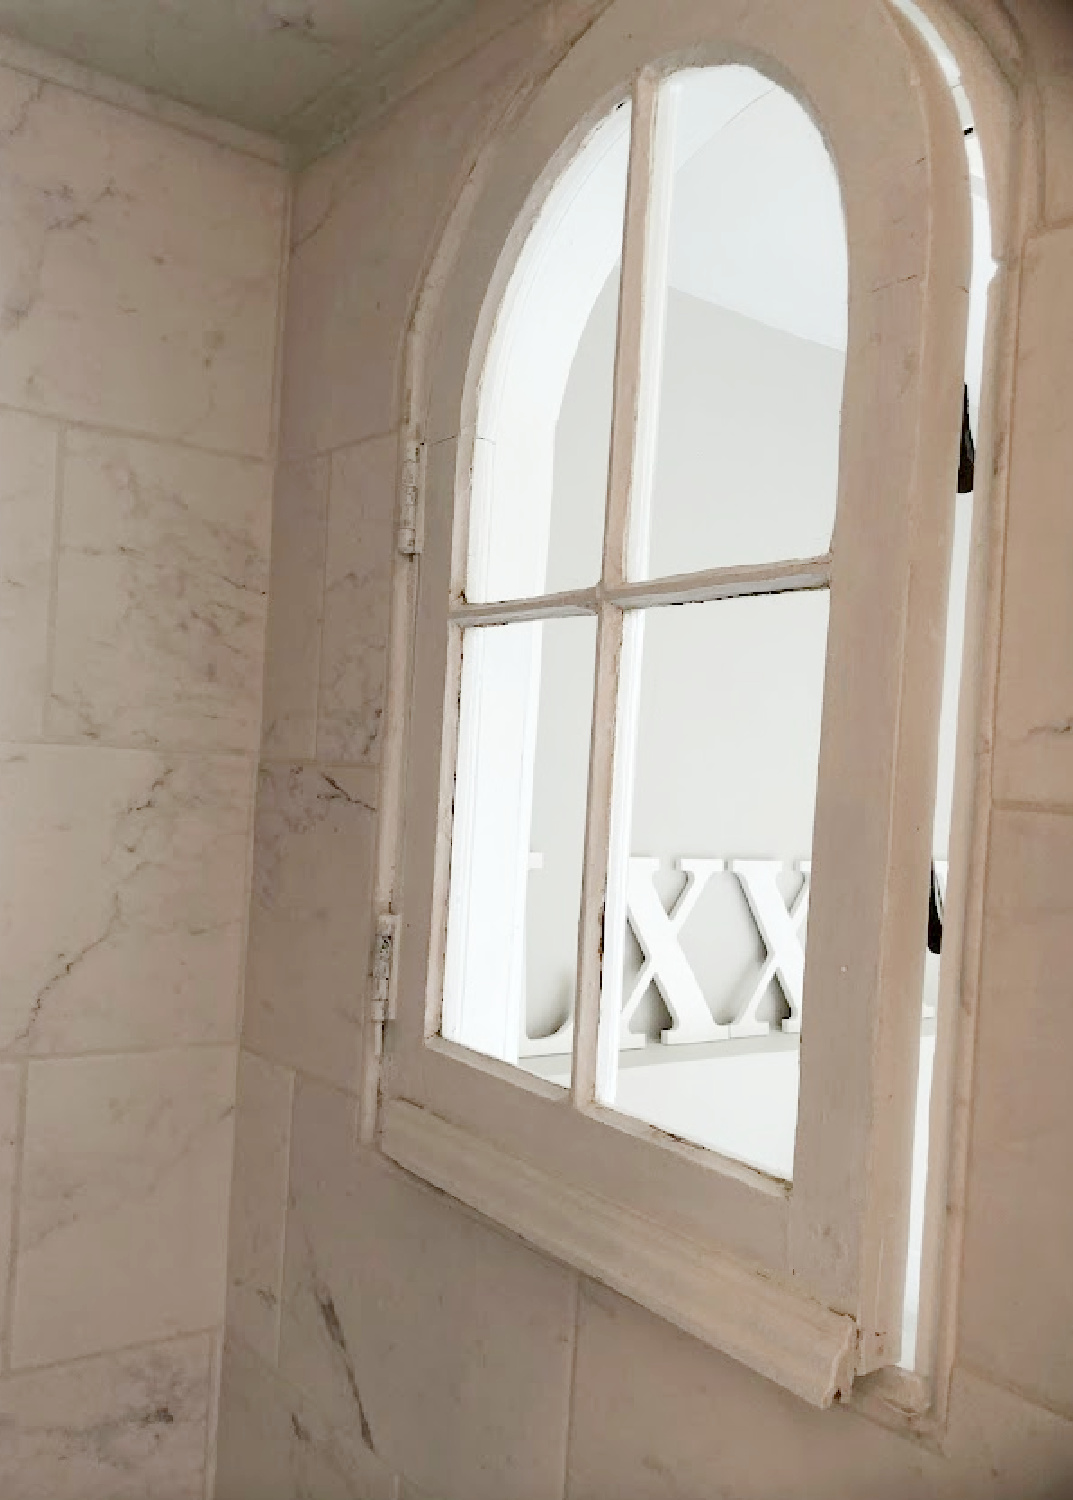 Vintage salvaged arched window with original hardware installed in our renovated shower with marble look porcelain at the Georgian - Hello Lovely Studio.